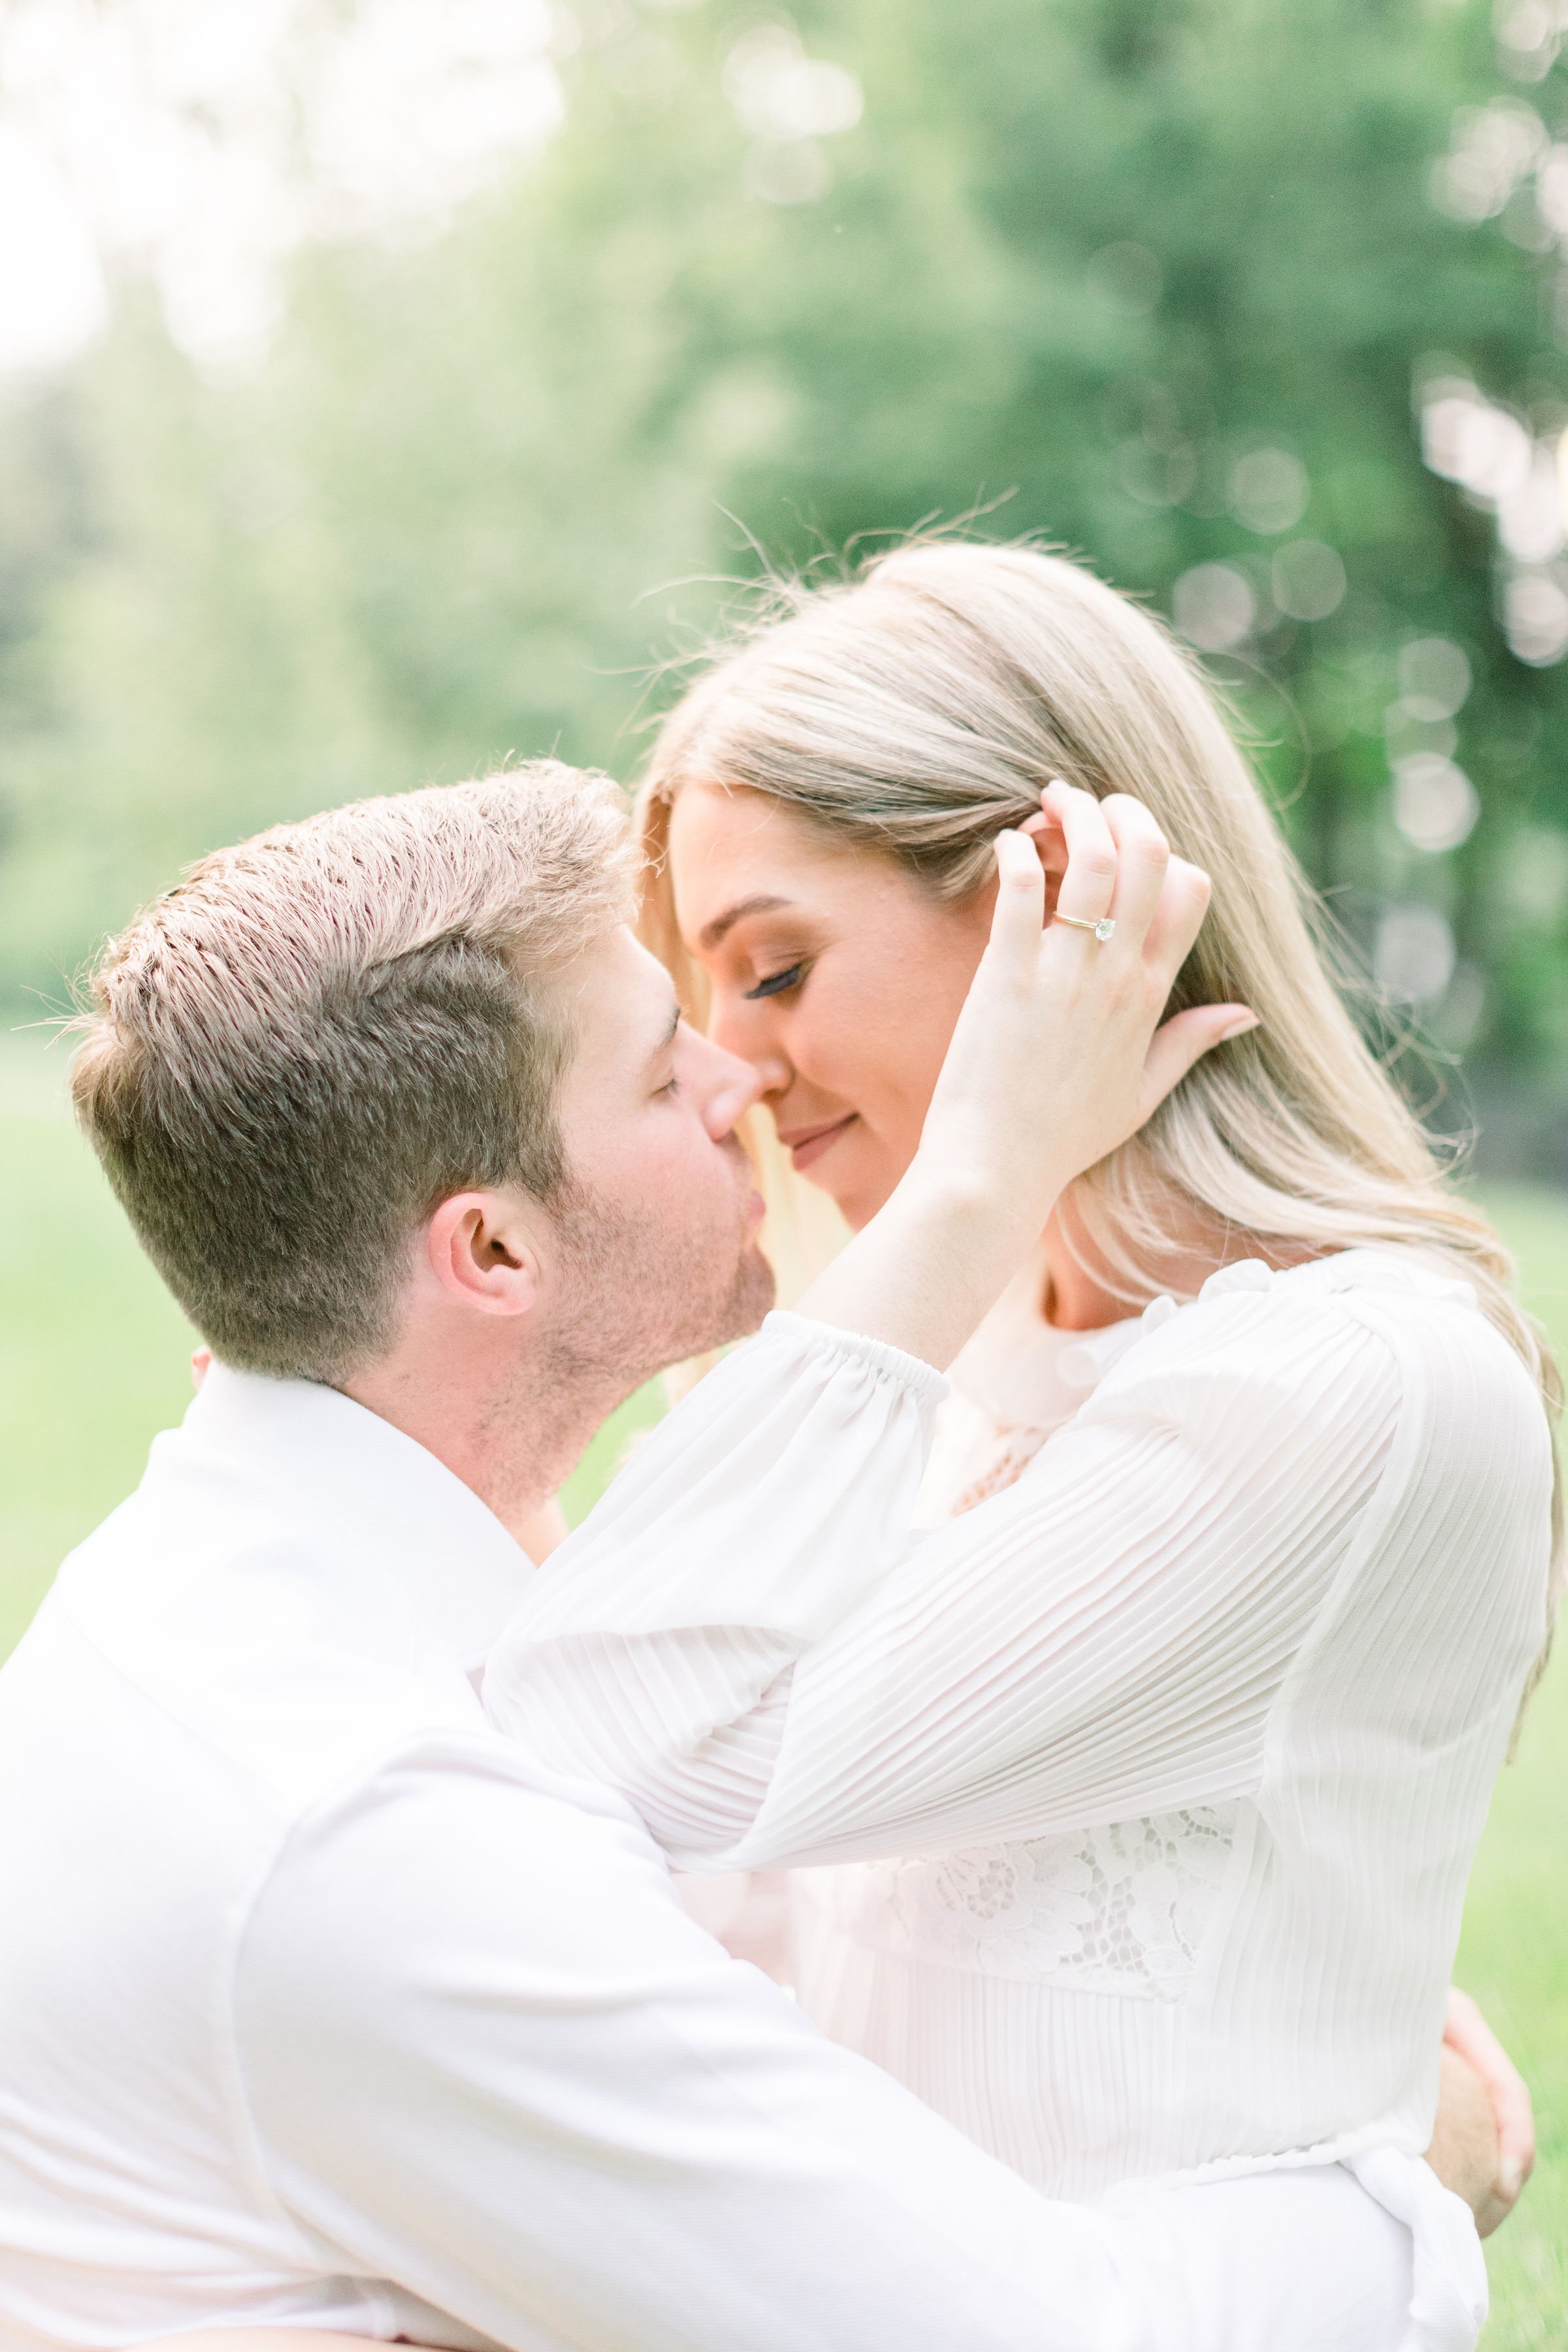  A bright and airy portrait of a man and woman kissing was captured by Chelsea Mason Photography. Ottawa bright and airy photographer #Ottawaengagements #Ottawaweddingphotographers #engagementwithdogs #ChelseaMasonPhotography #ChelseaMasonEngagements